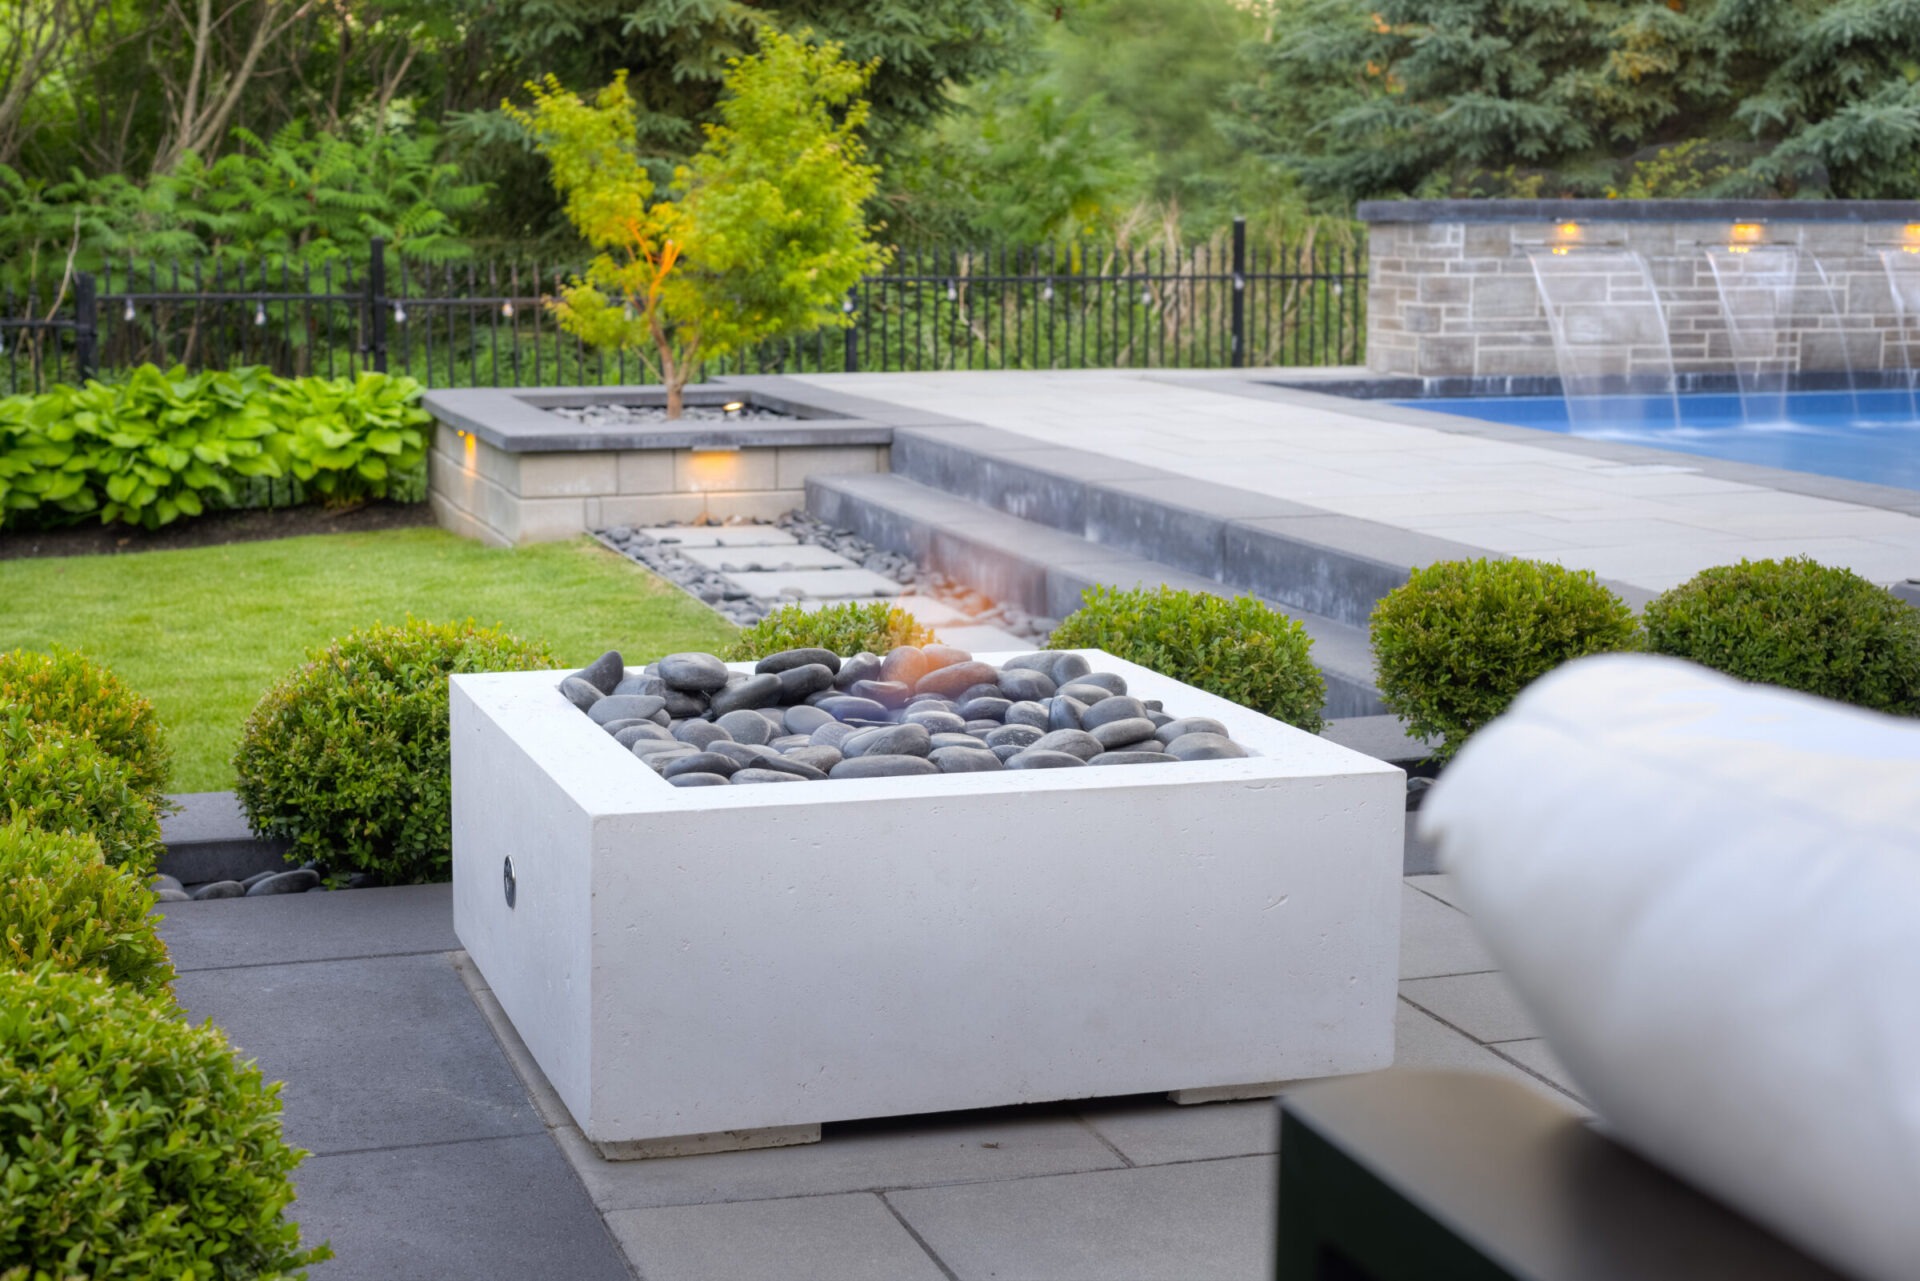 An outdoor space featuring a square fire pit with stones, trimmed bushes, an inviting swimming pool with fountains, and comfortable seating areas.